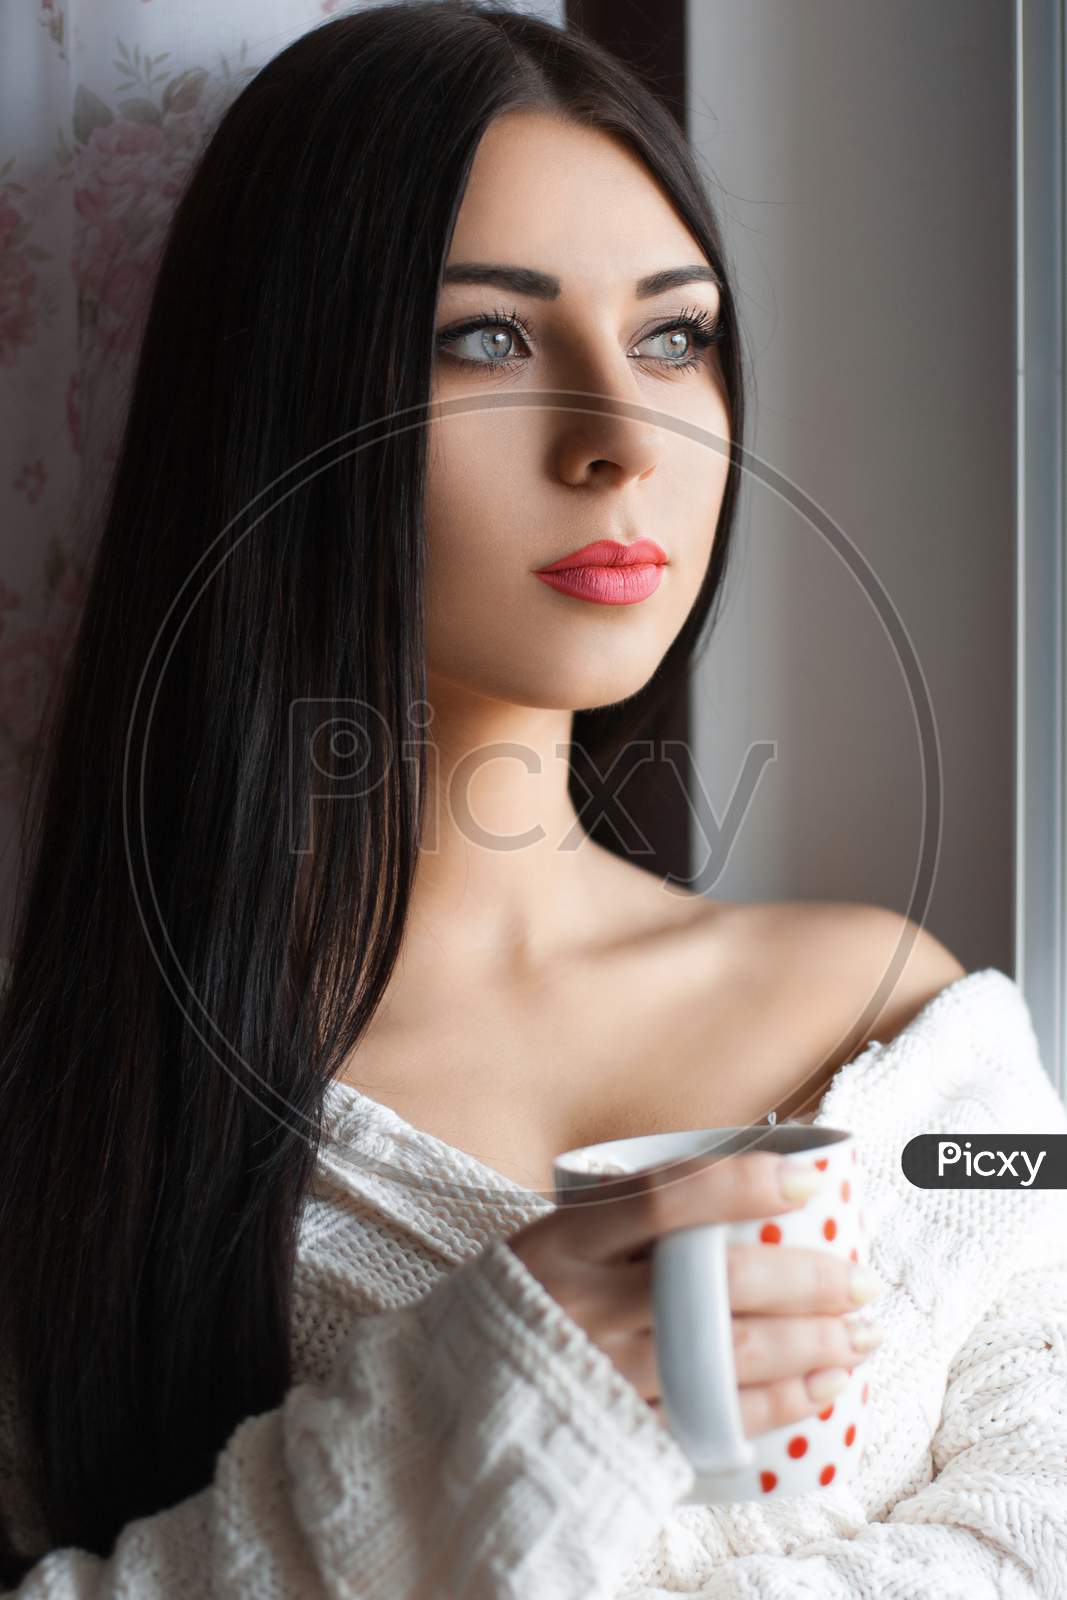 Beautiful Girl With Long Hair Drinking Coffee By The Window